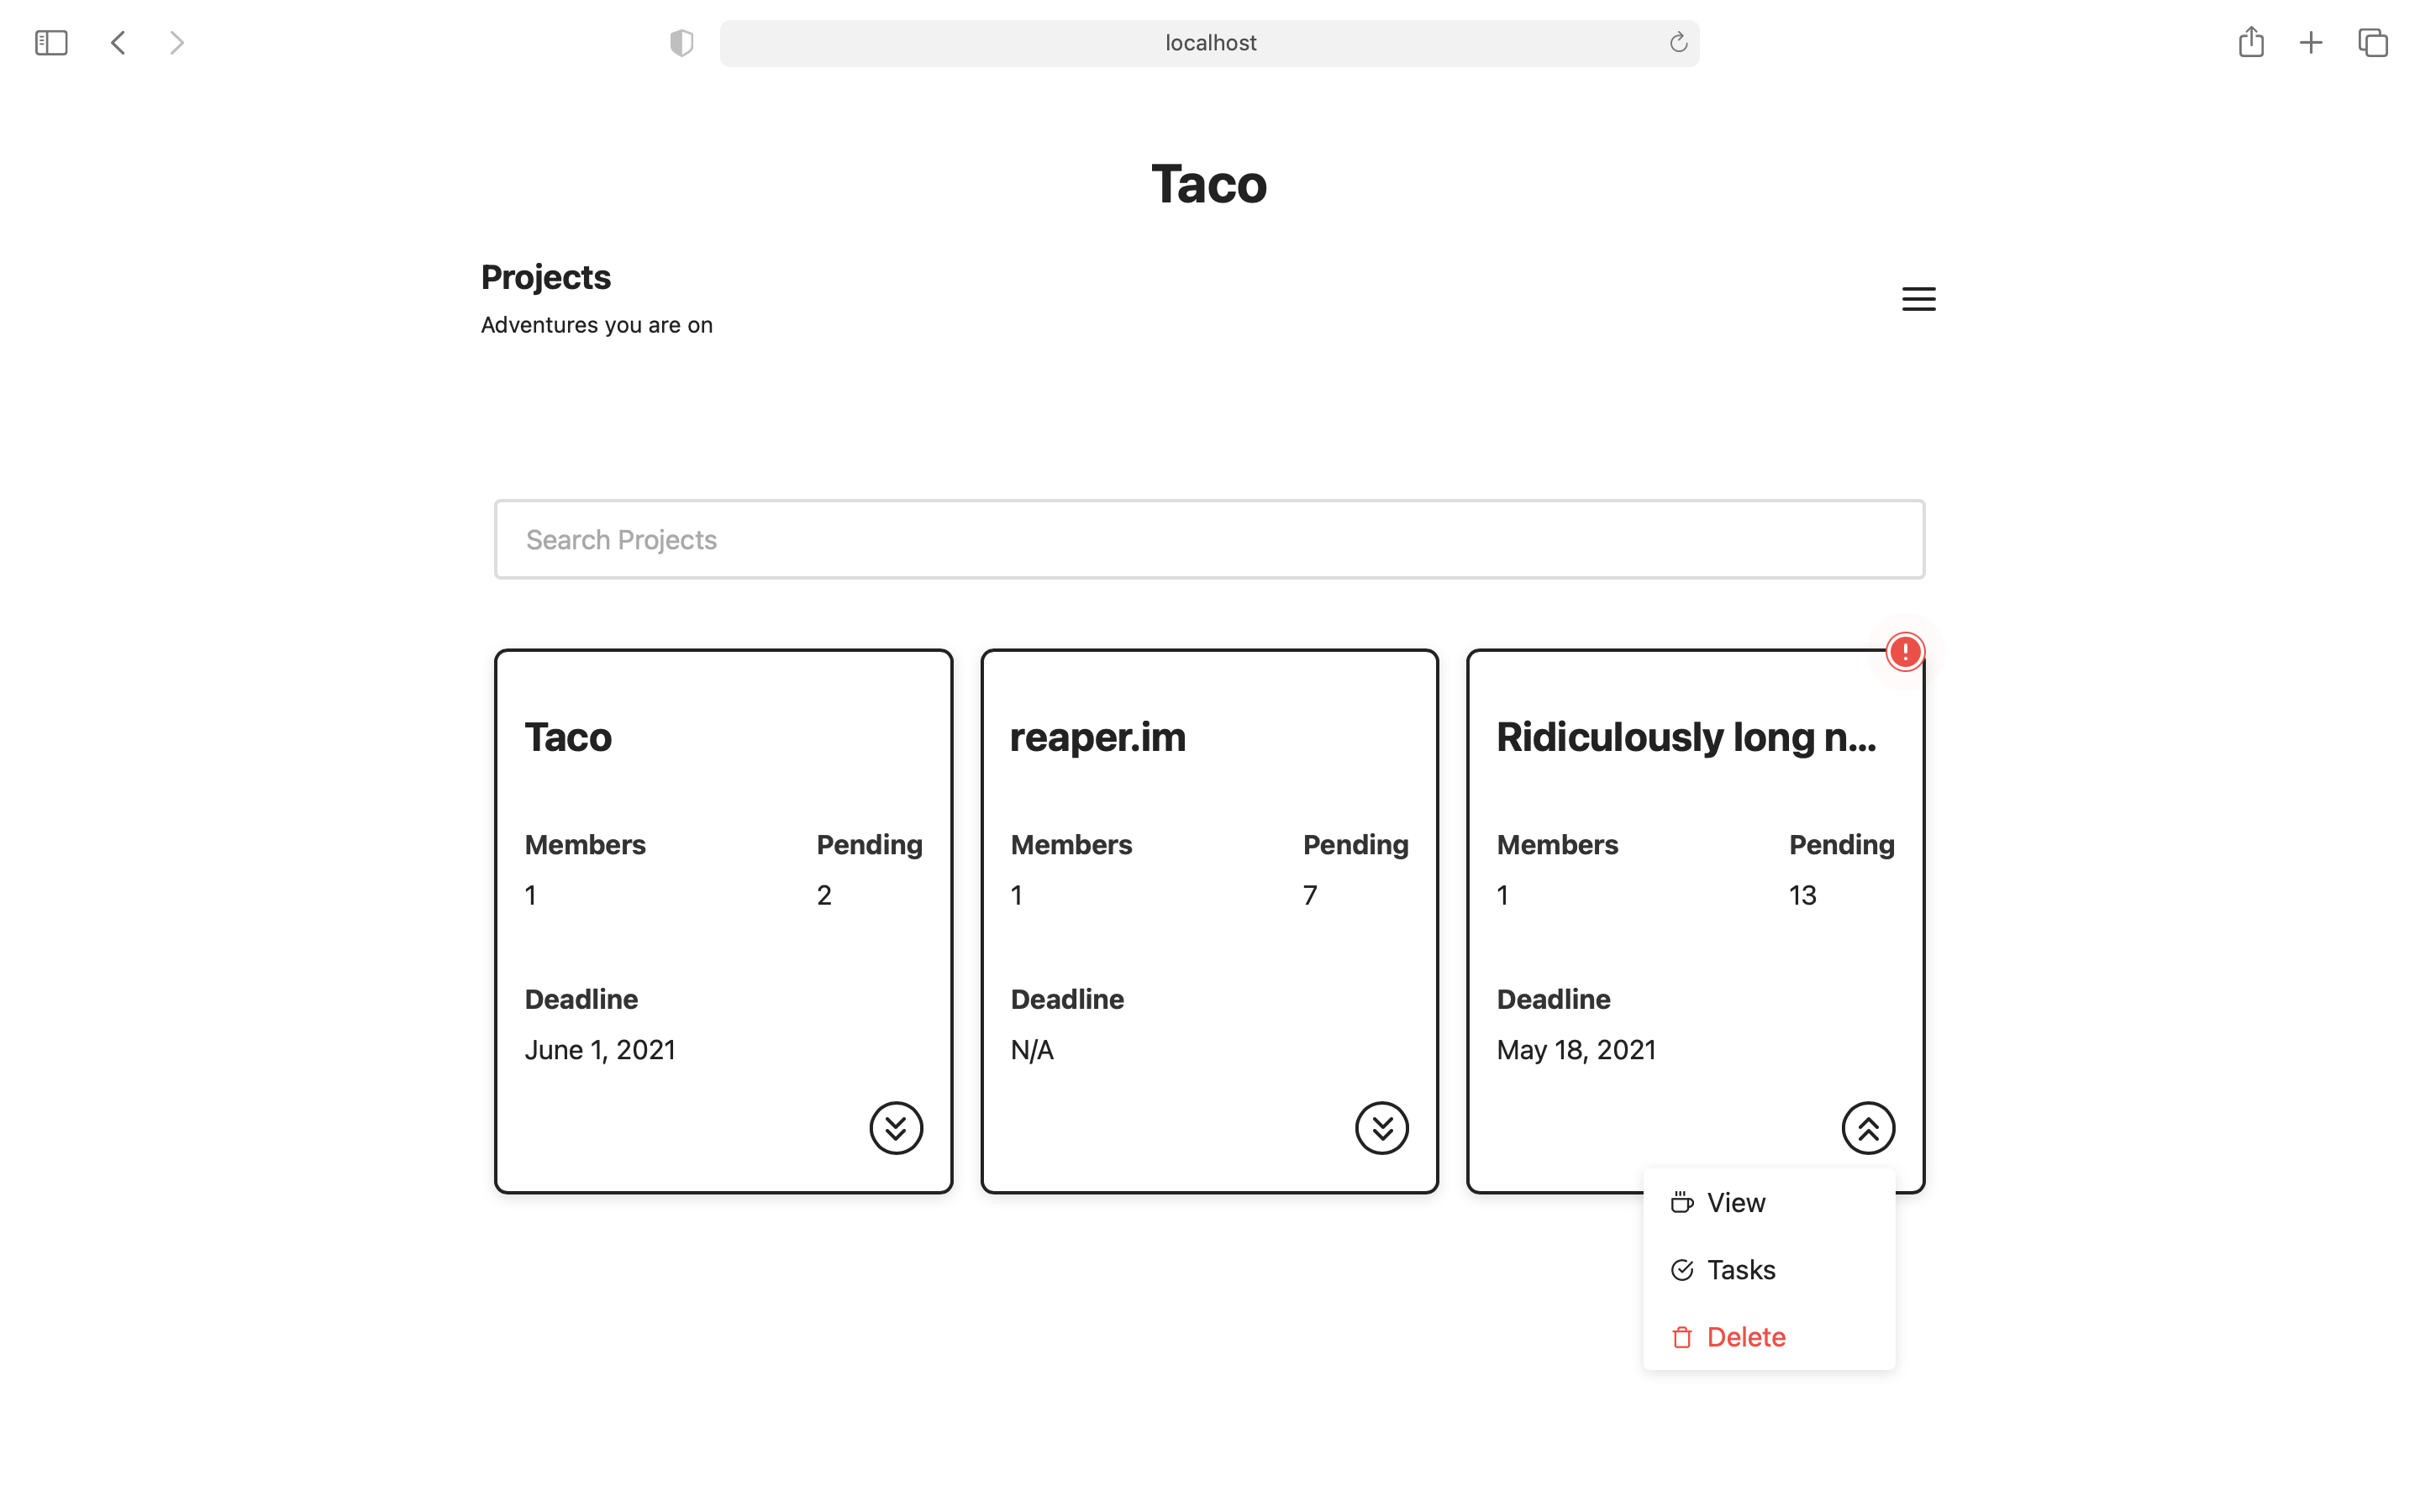 Preview Projects Taco